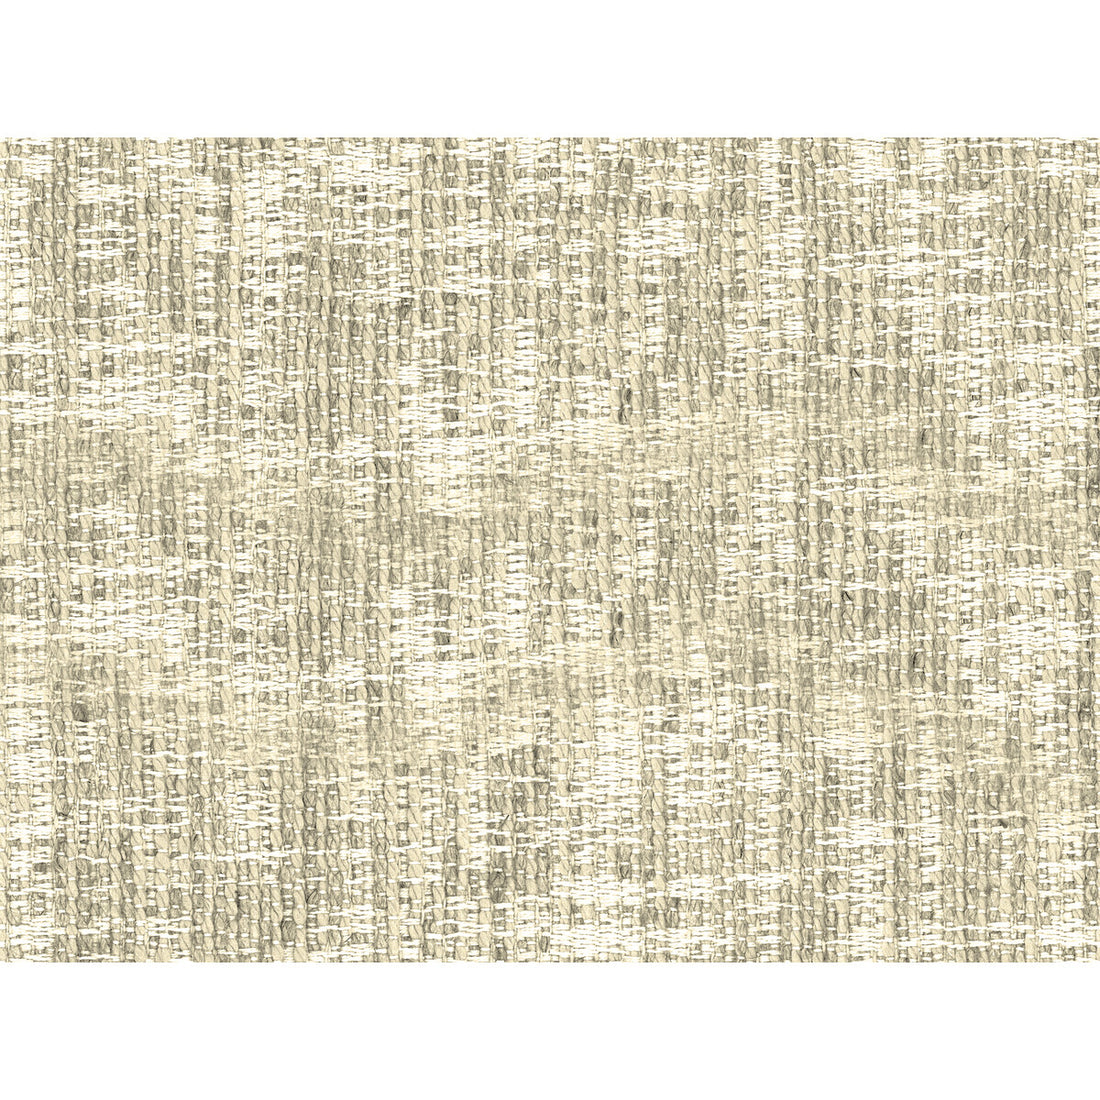 Cumbria fabric in almond color - pattern 2016123.16.0 - by Lee Jofa in the Furness Weaves collection